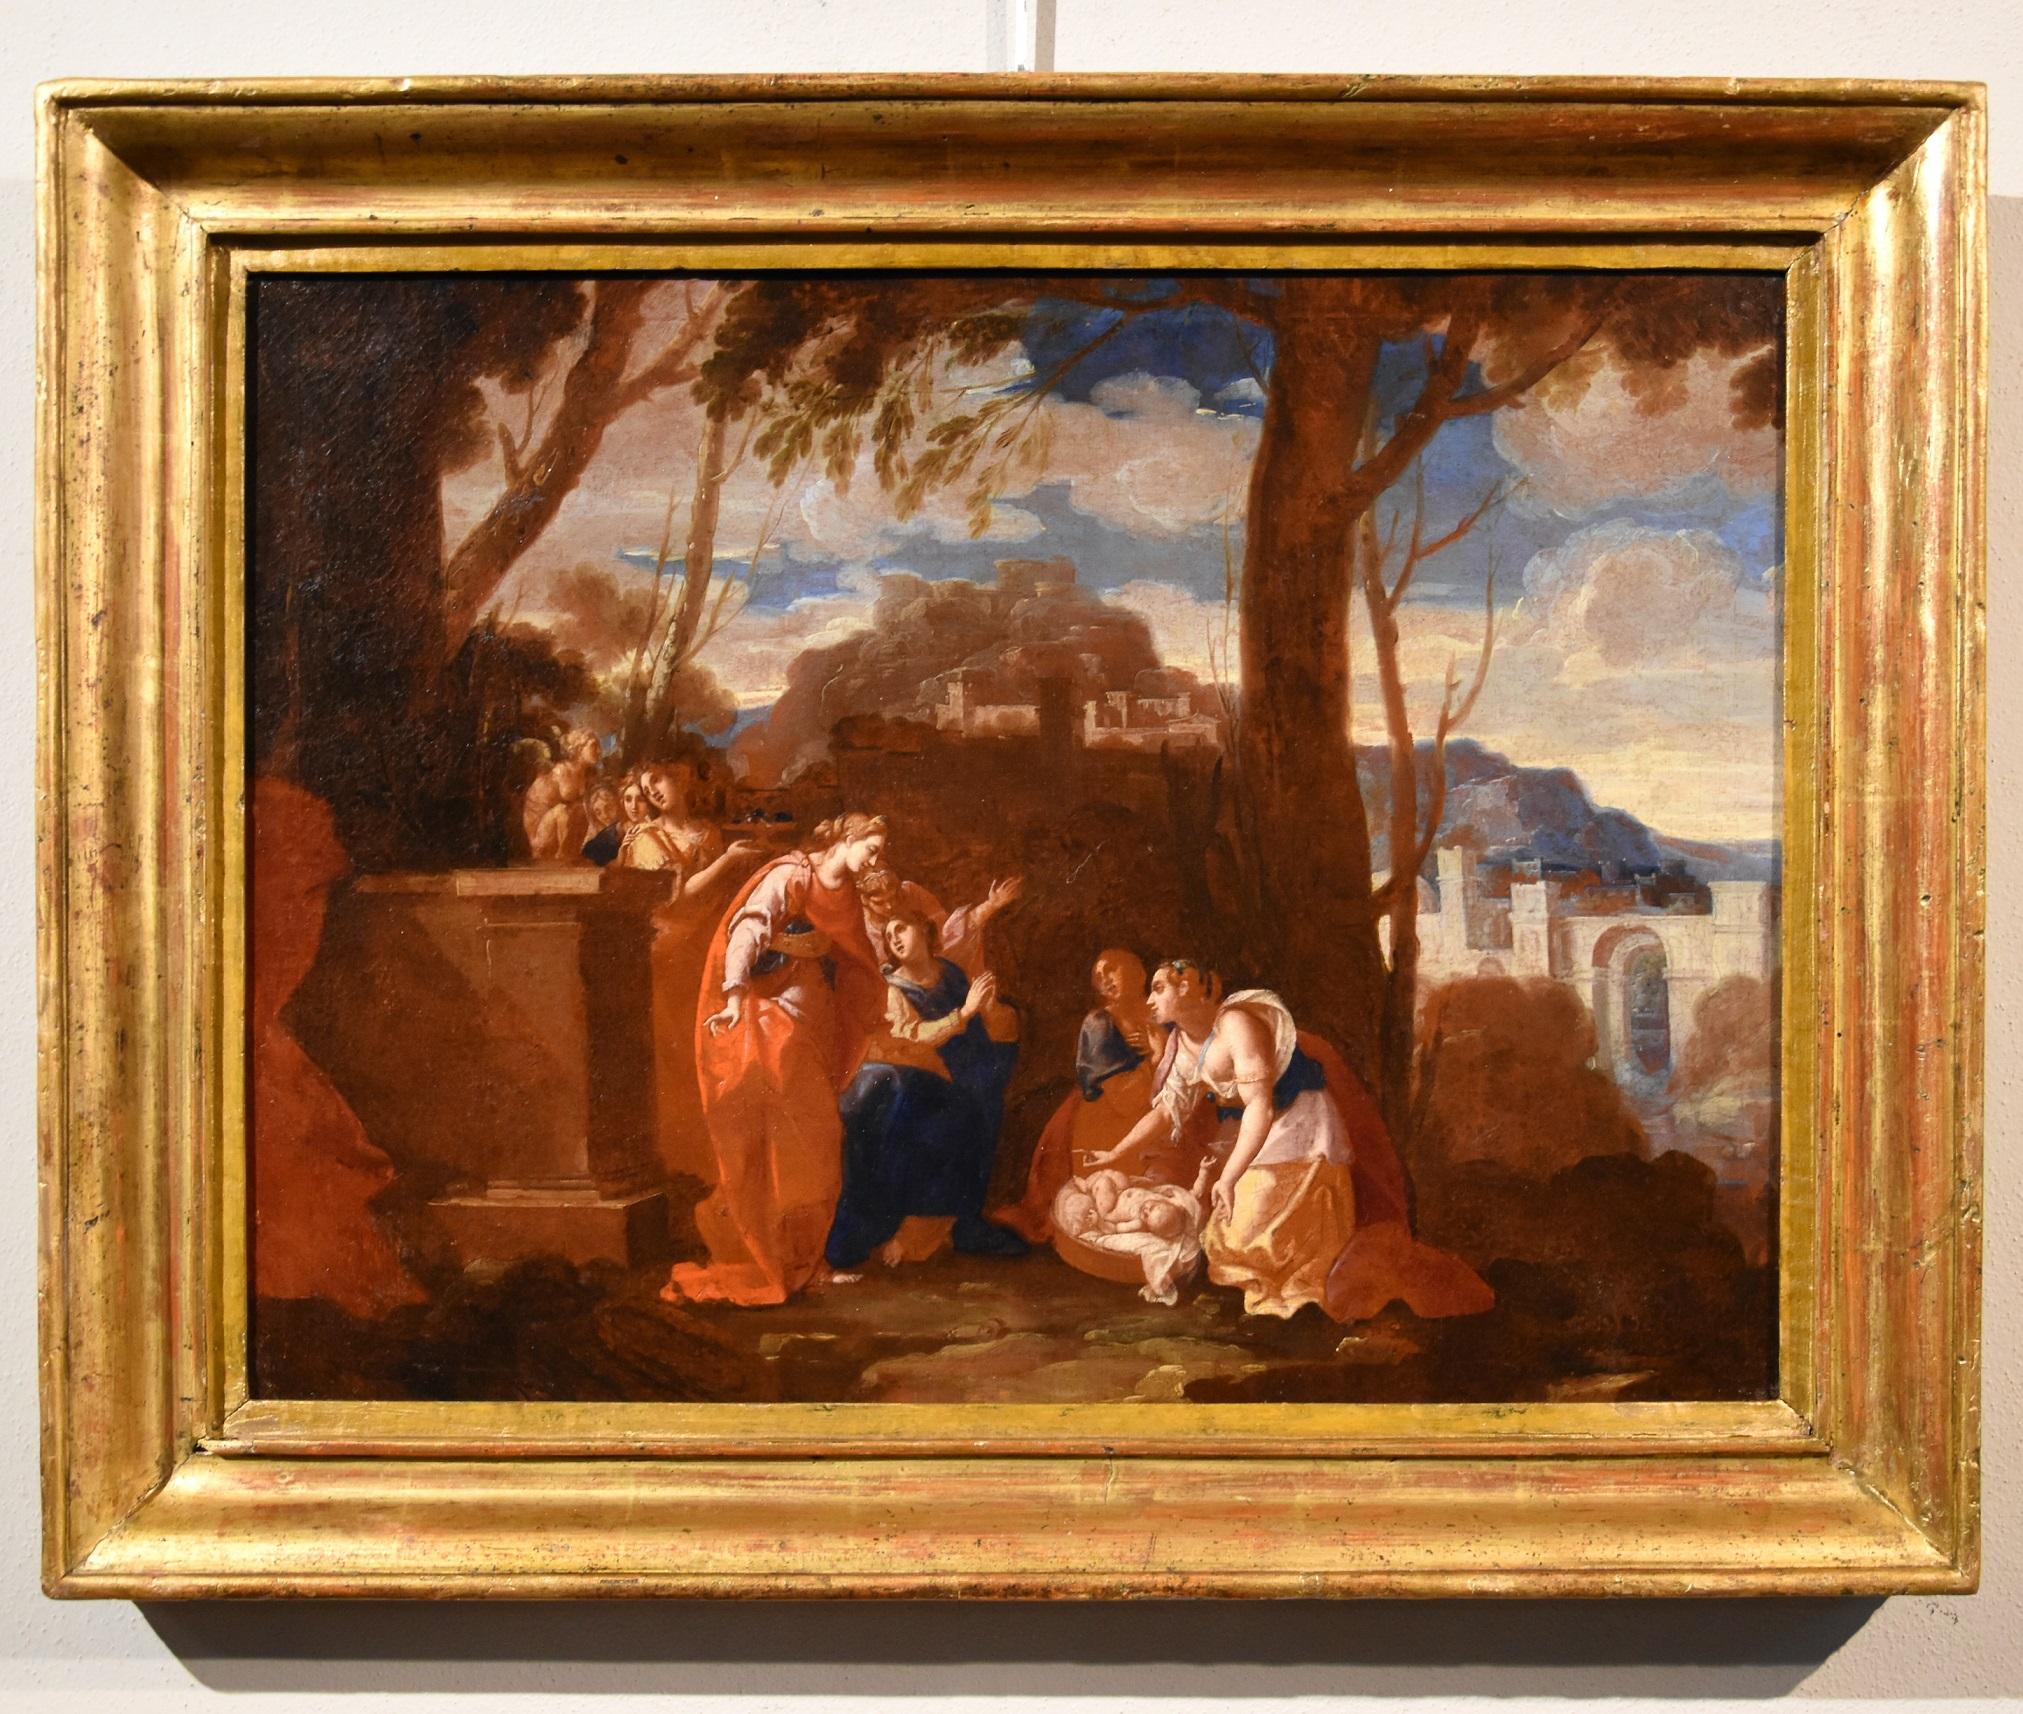 Poussin Moses Landscape Old master Oil on canvas Paint 17th Century Italy Art - Old Masters Painting by Nicolas Poussin (Les Andelys 1594 - Rome 1665) 